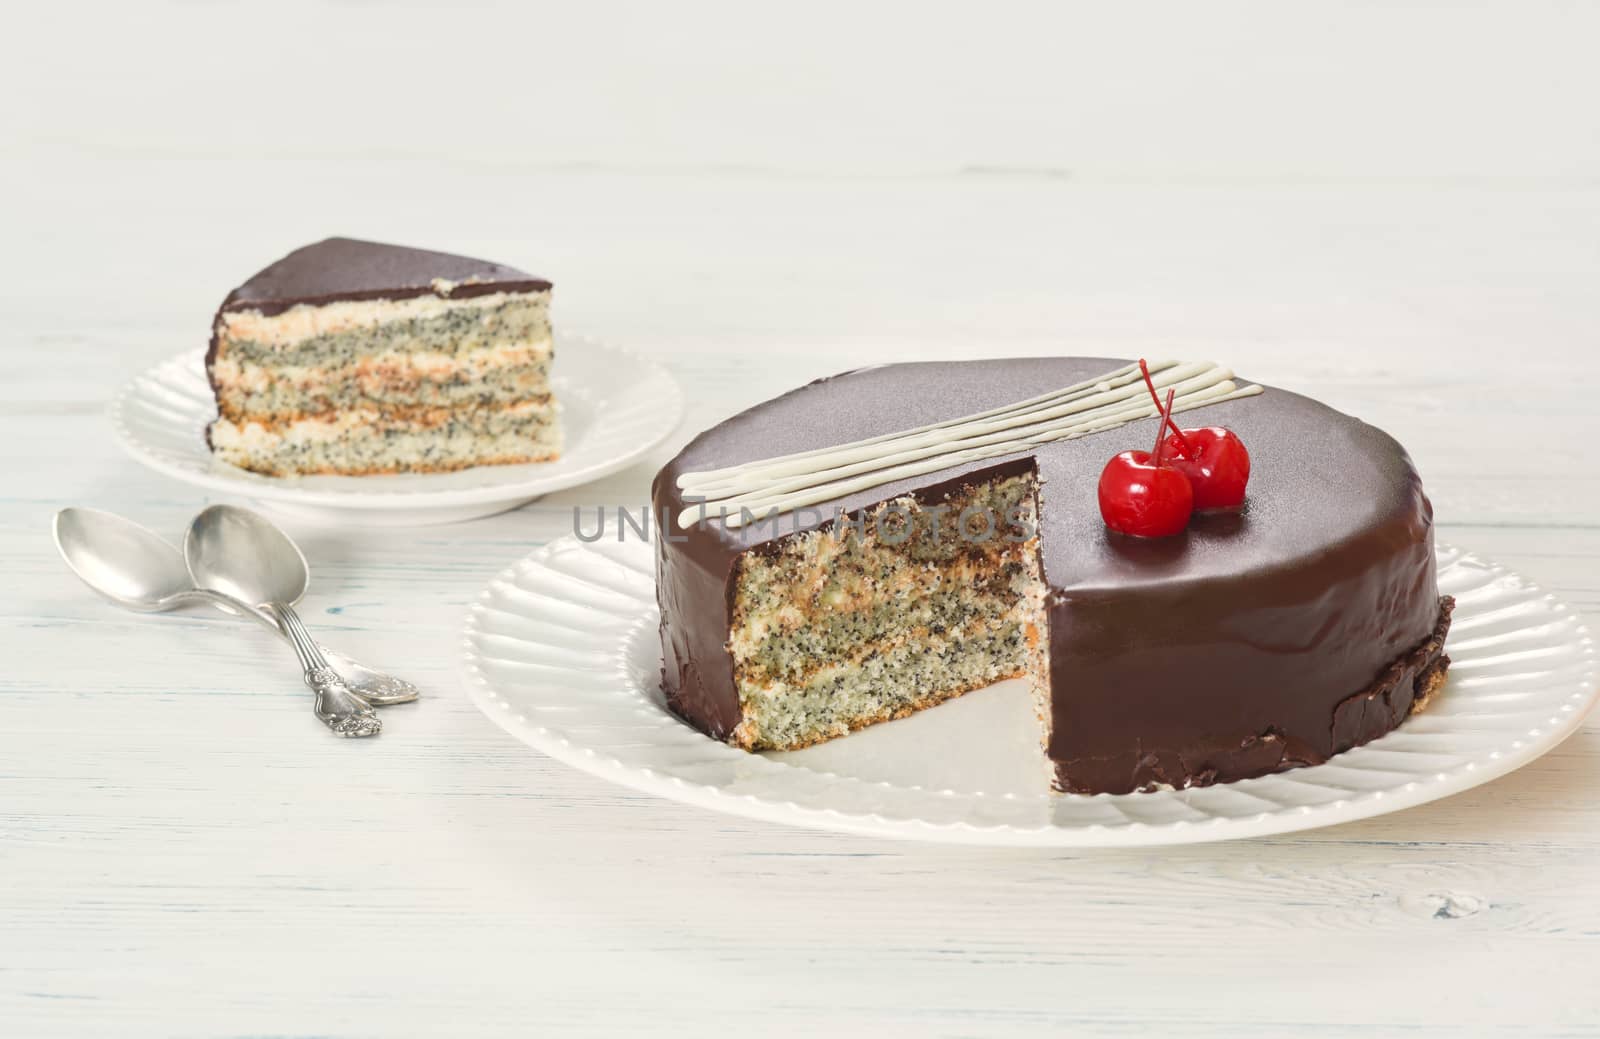 Chocolate-covered poppy seed cake with cherries by kzen